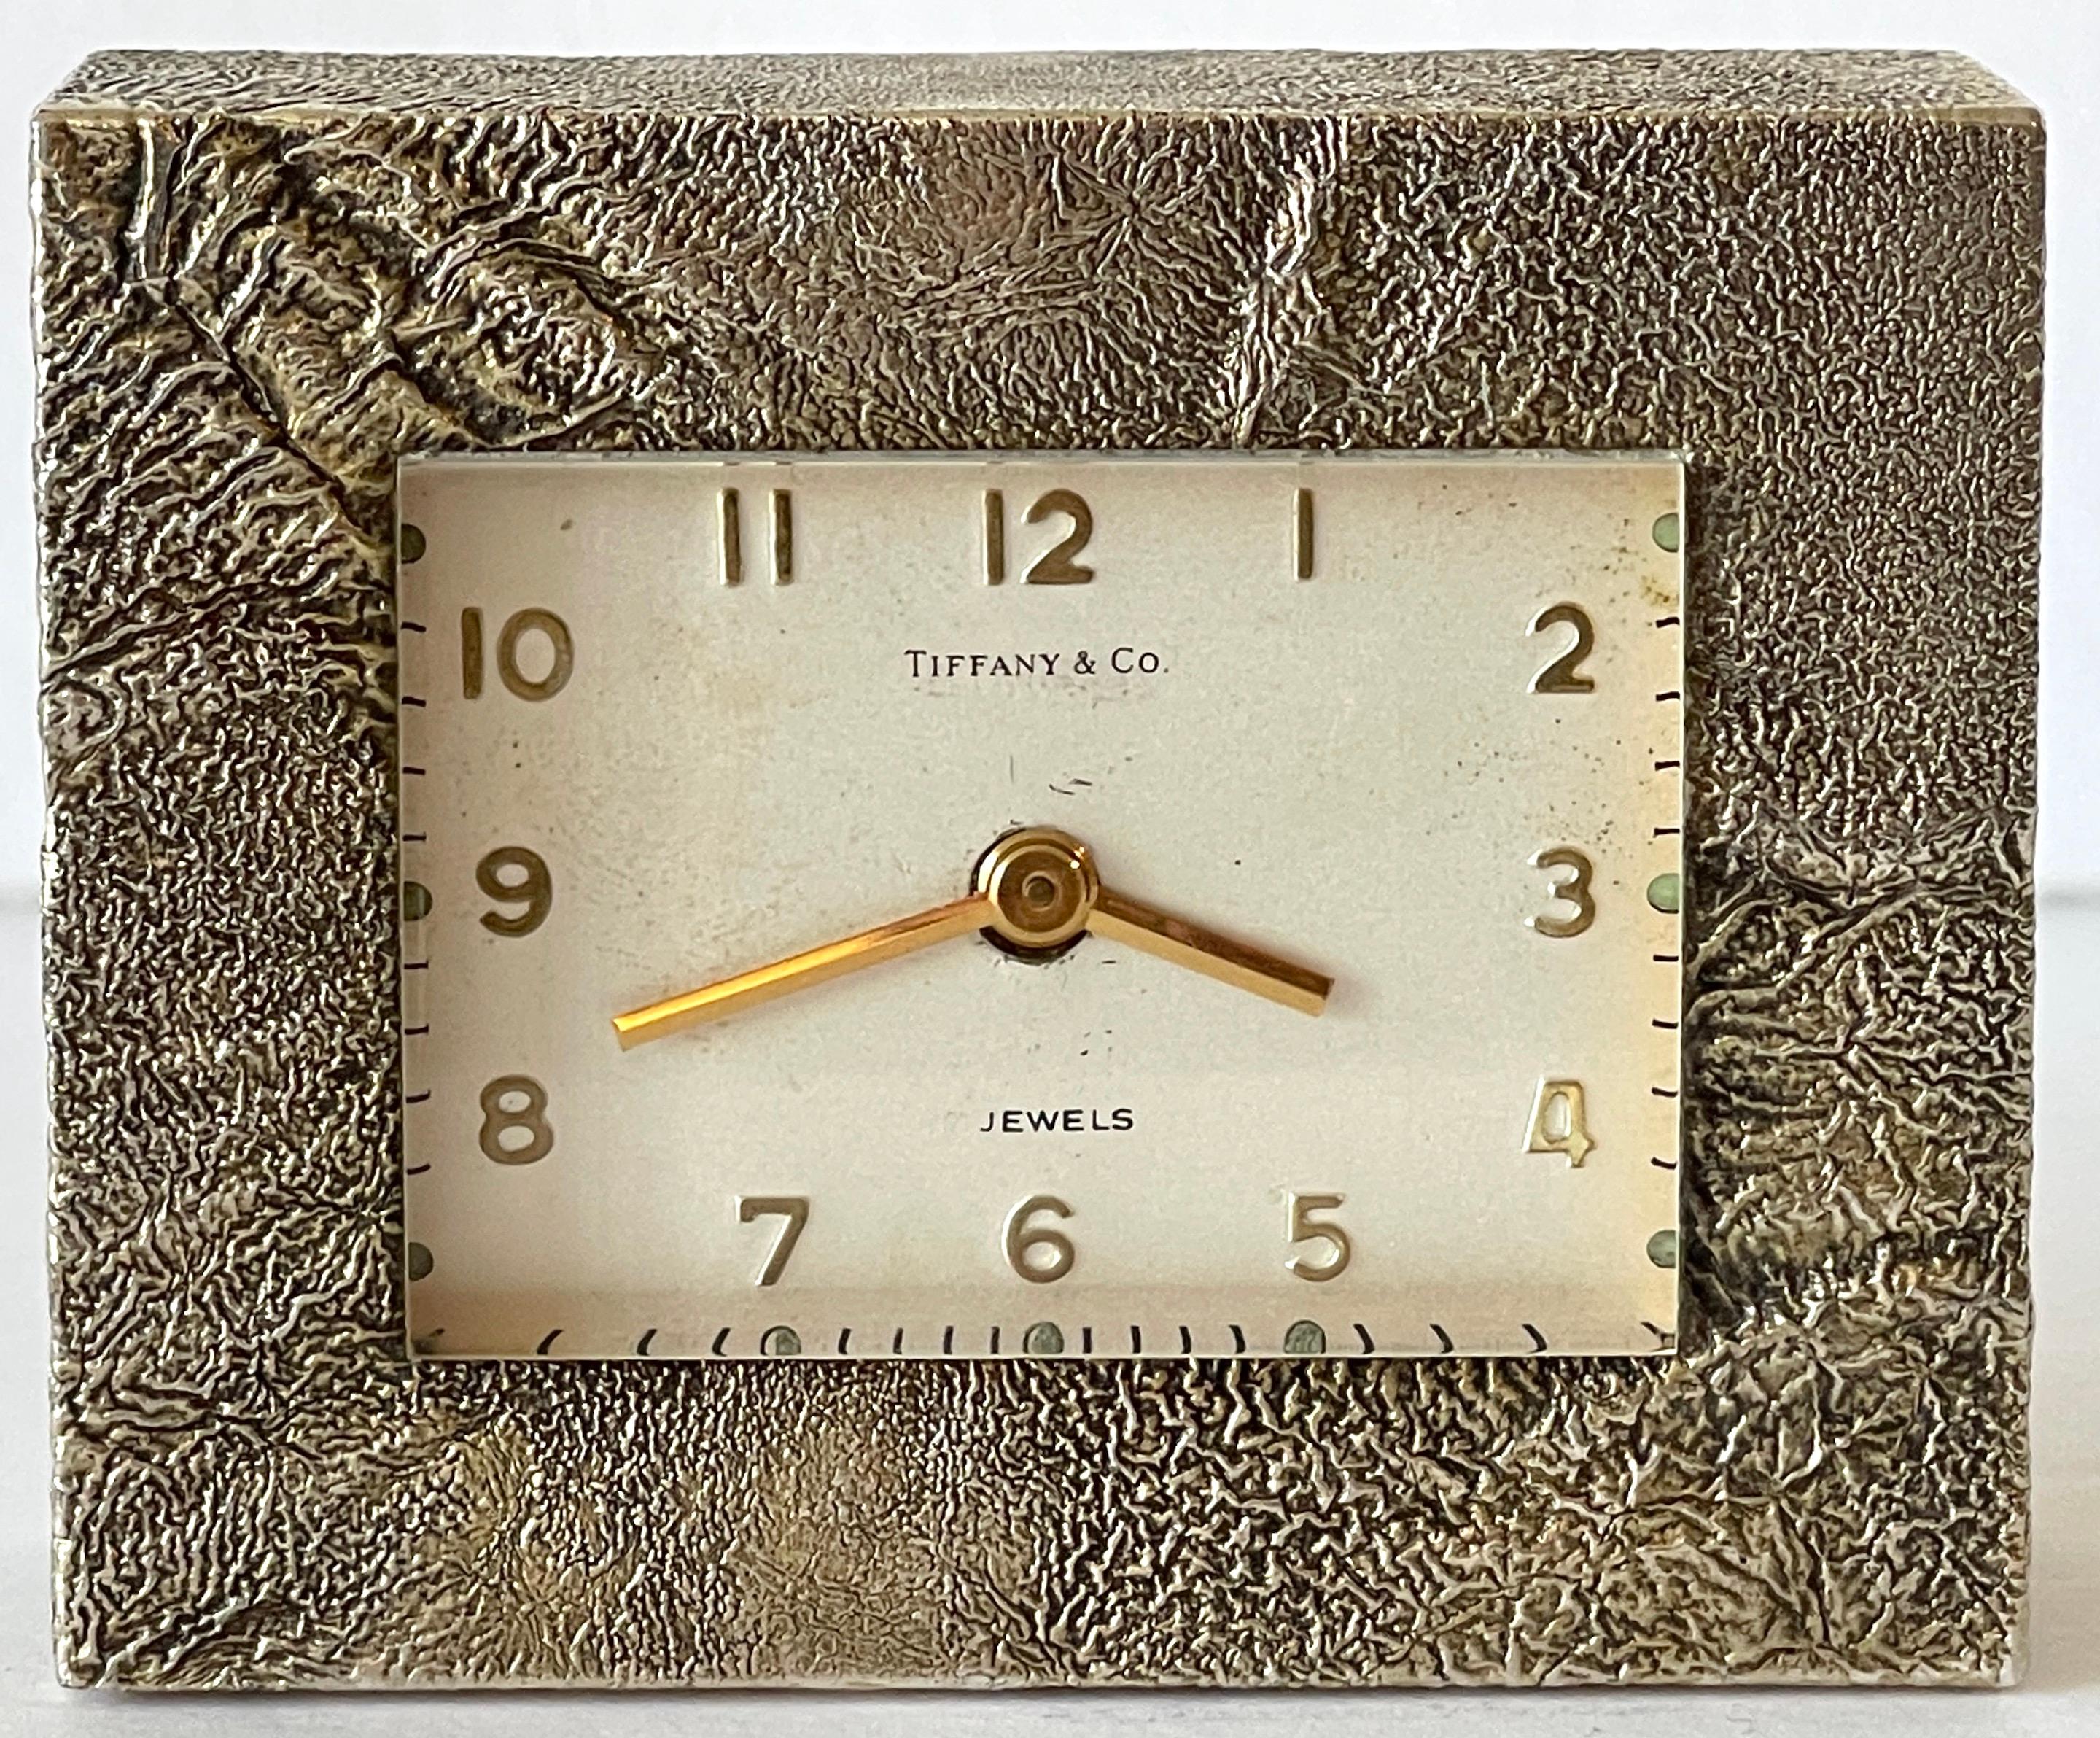 Tiffany & Co. Modern cast bronze 'rockwork' table clock, Swiss jeweled movement.
Switzerland, Circa 1960s 

A stunning example of 1960s Tiffany & Co. modern design. This work, a cast rockwork bronze case, highlighted with silver and gold plating.